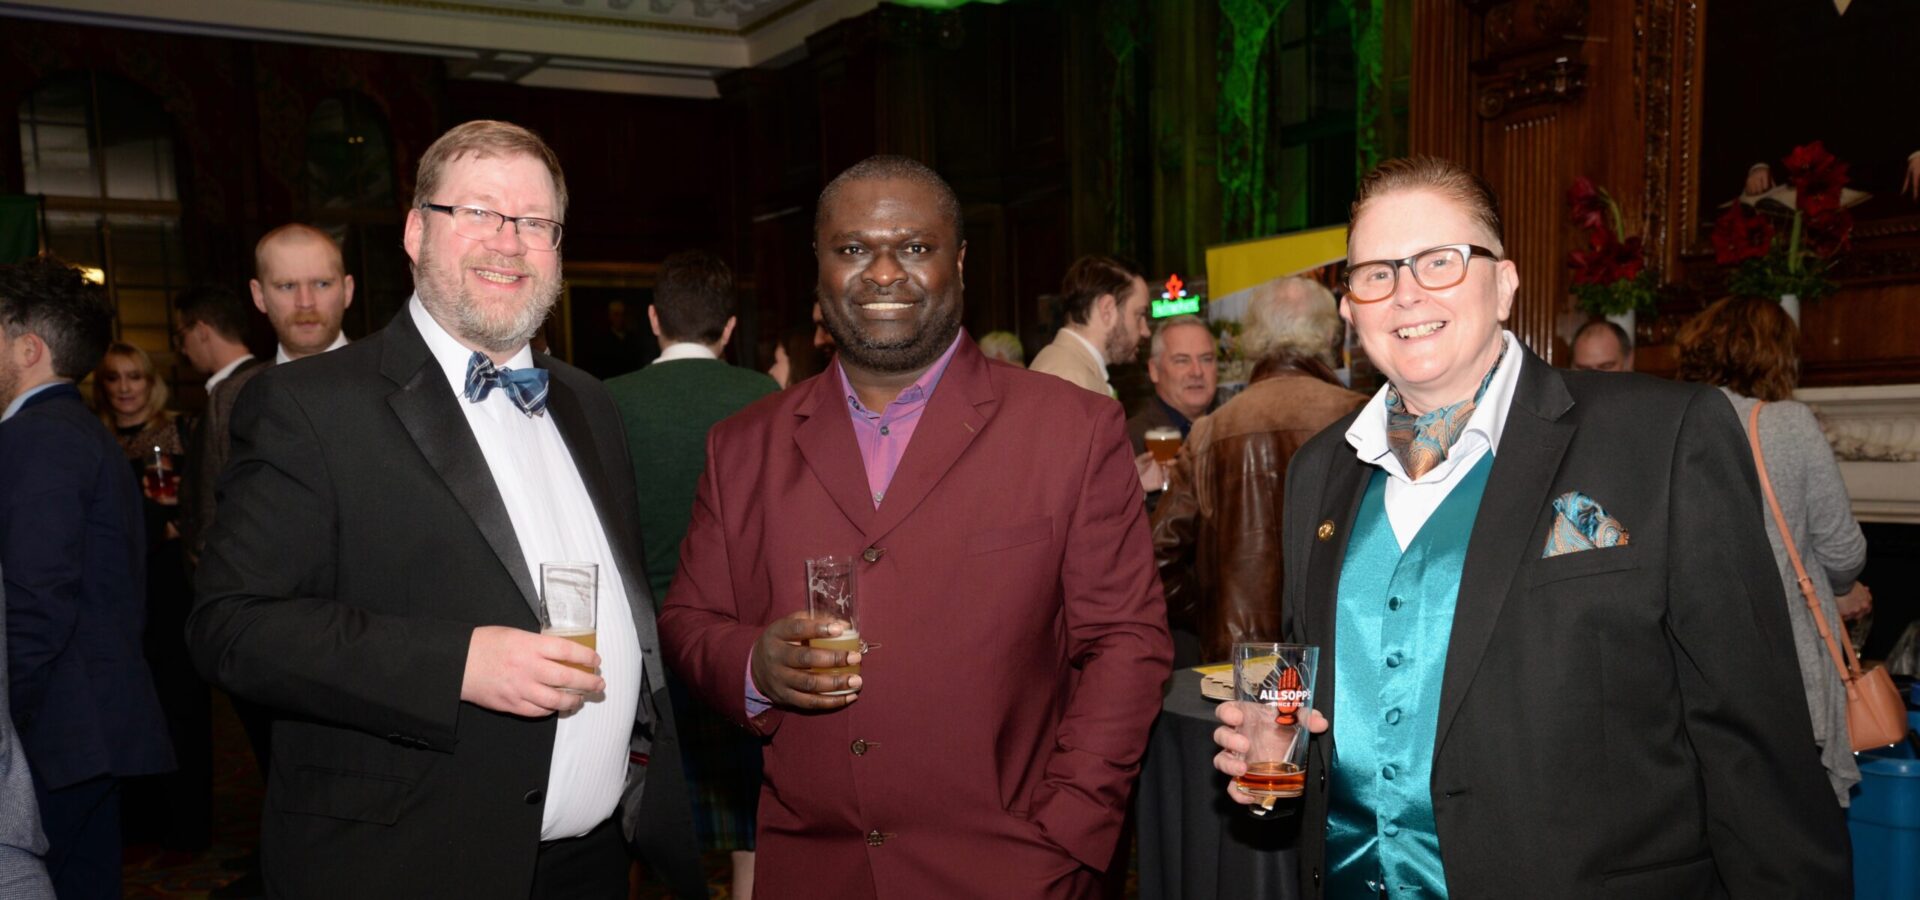 The British Guild of Beer Writers header image